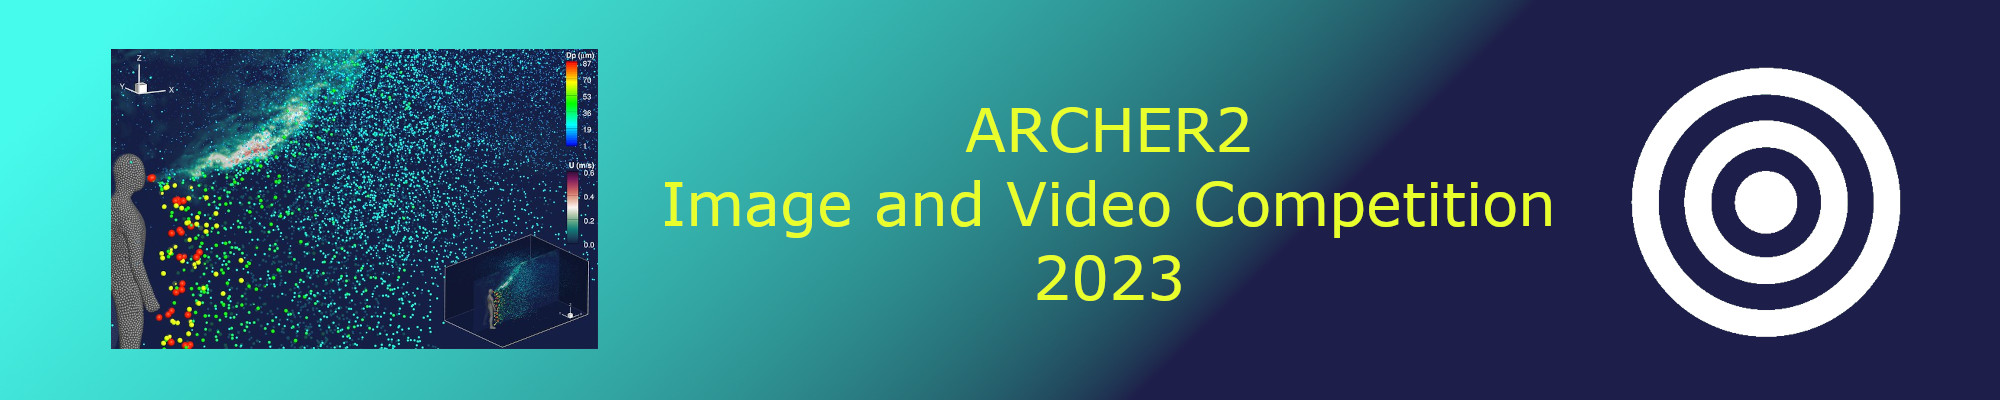 ARCHER2 Image and Video Competition 2023